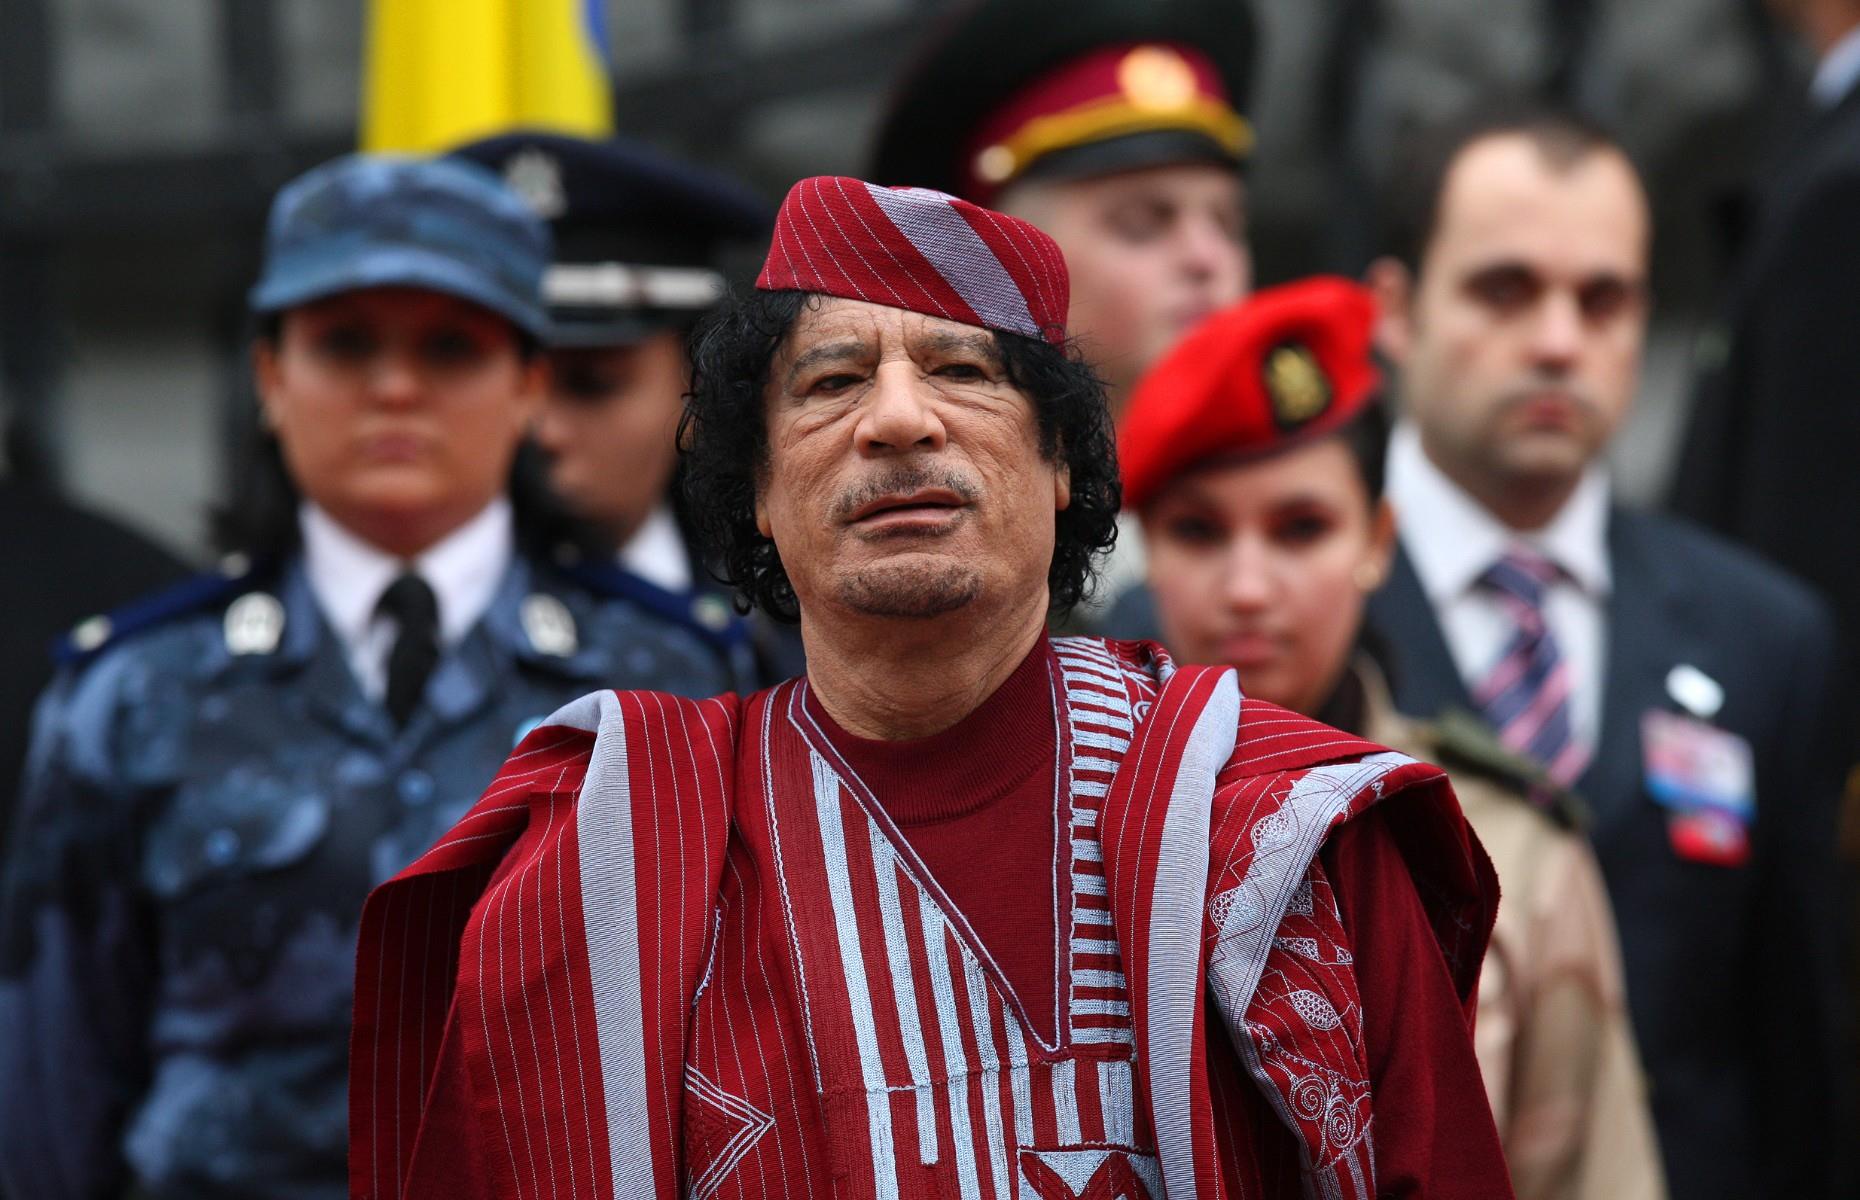 <p>Richest world leader number two is Libyan dictator Muammar Gaddafi. In 2011, officials estimated that the assassinated chairman, who was in power from 1977 to 2011, stashed away $200 billion in secret bank accounts, shady investments and suspect real estate deals, courtesy of the country's massive oil revenues. Gaddafi's wealth was intended to go into a trust to help stabilise war-torn Libya, but the colonel continues to be controversial even in death, with his frozen funds generating cash for unknown beneficiaries and much of his money's whereabouts still a mystery.</p>  <p><strong>Find out who was <a href="https://www.lovemoney.com/galleries/74533/the-worlds-richest-person-in-every-decade?page=1">the world's richest person in every decade</a></strong></p>